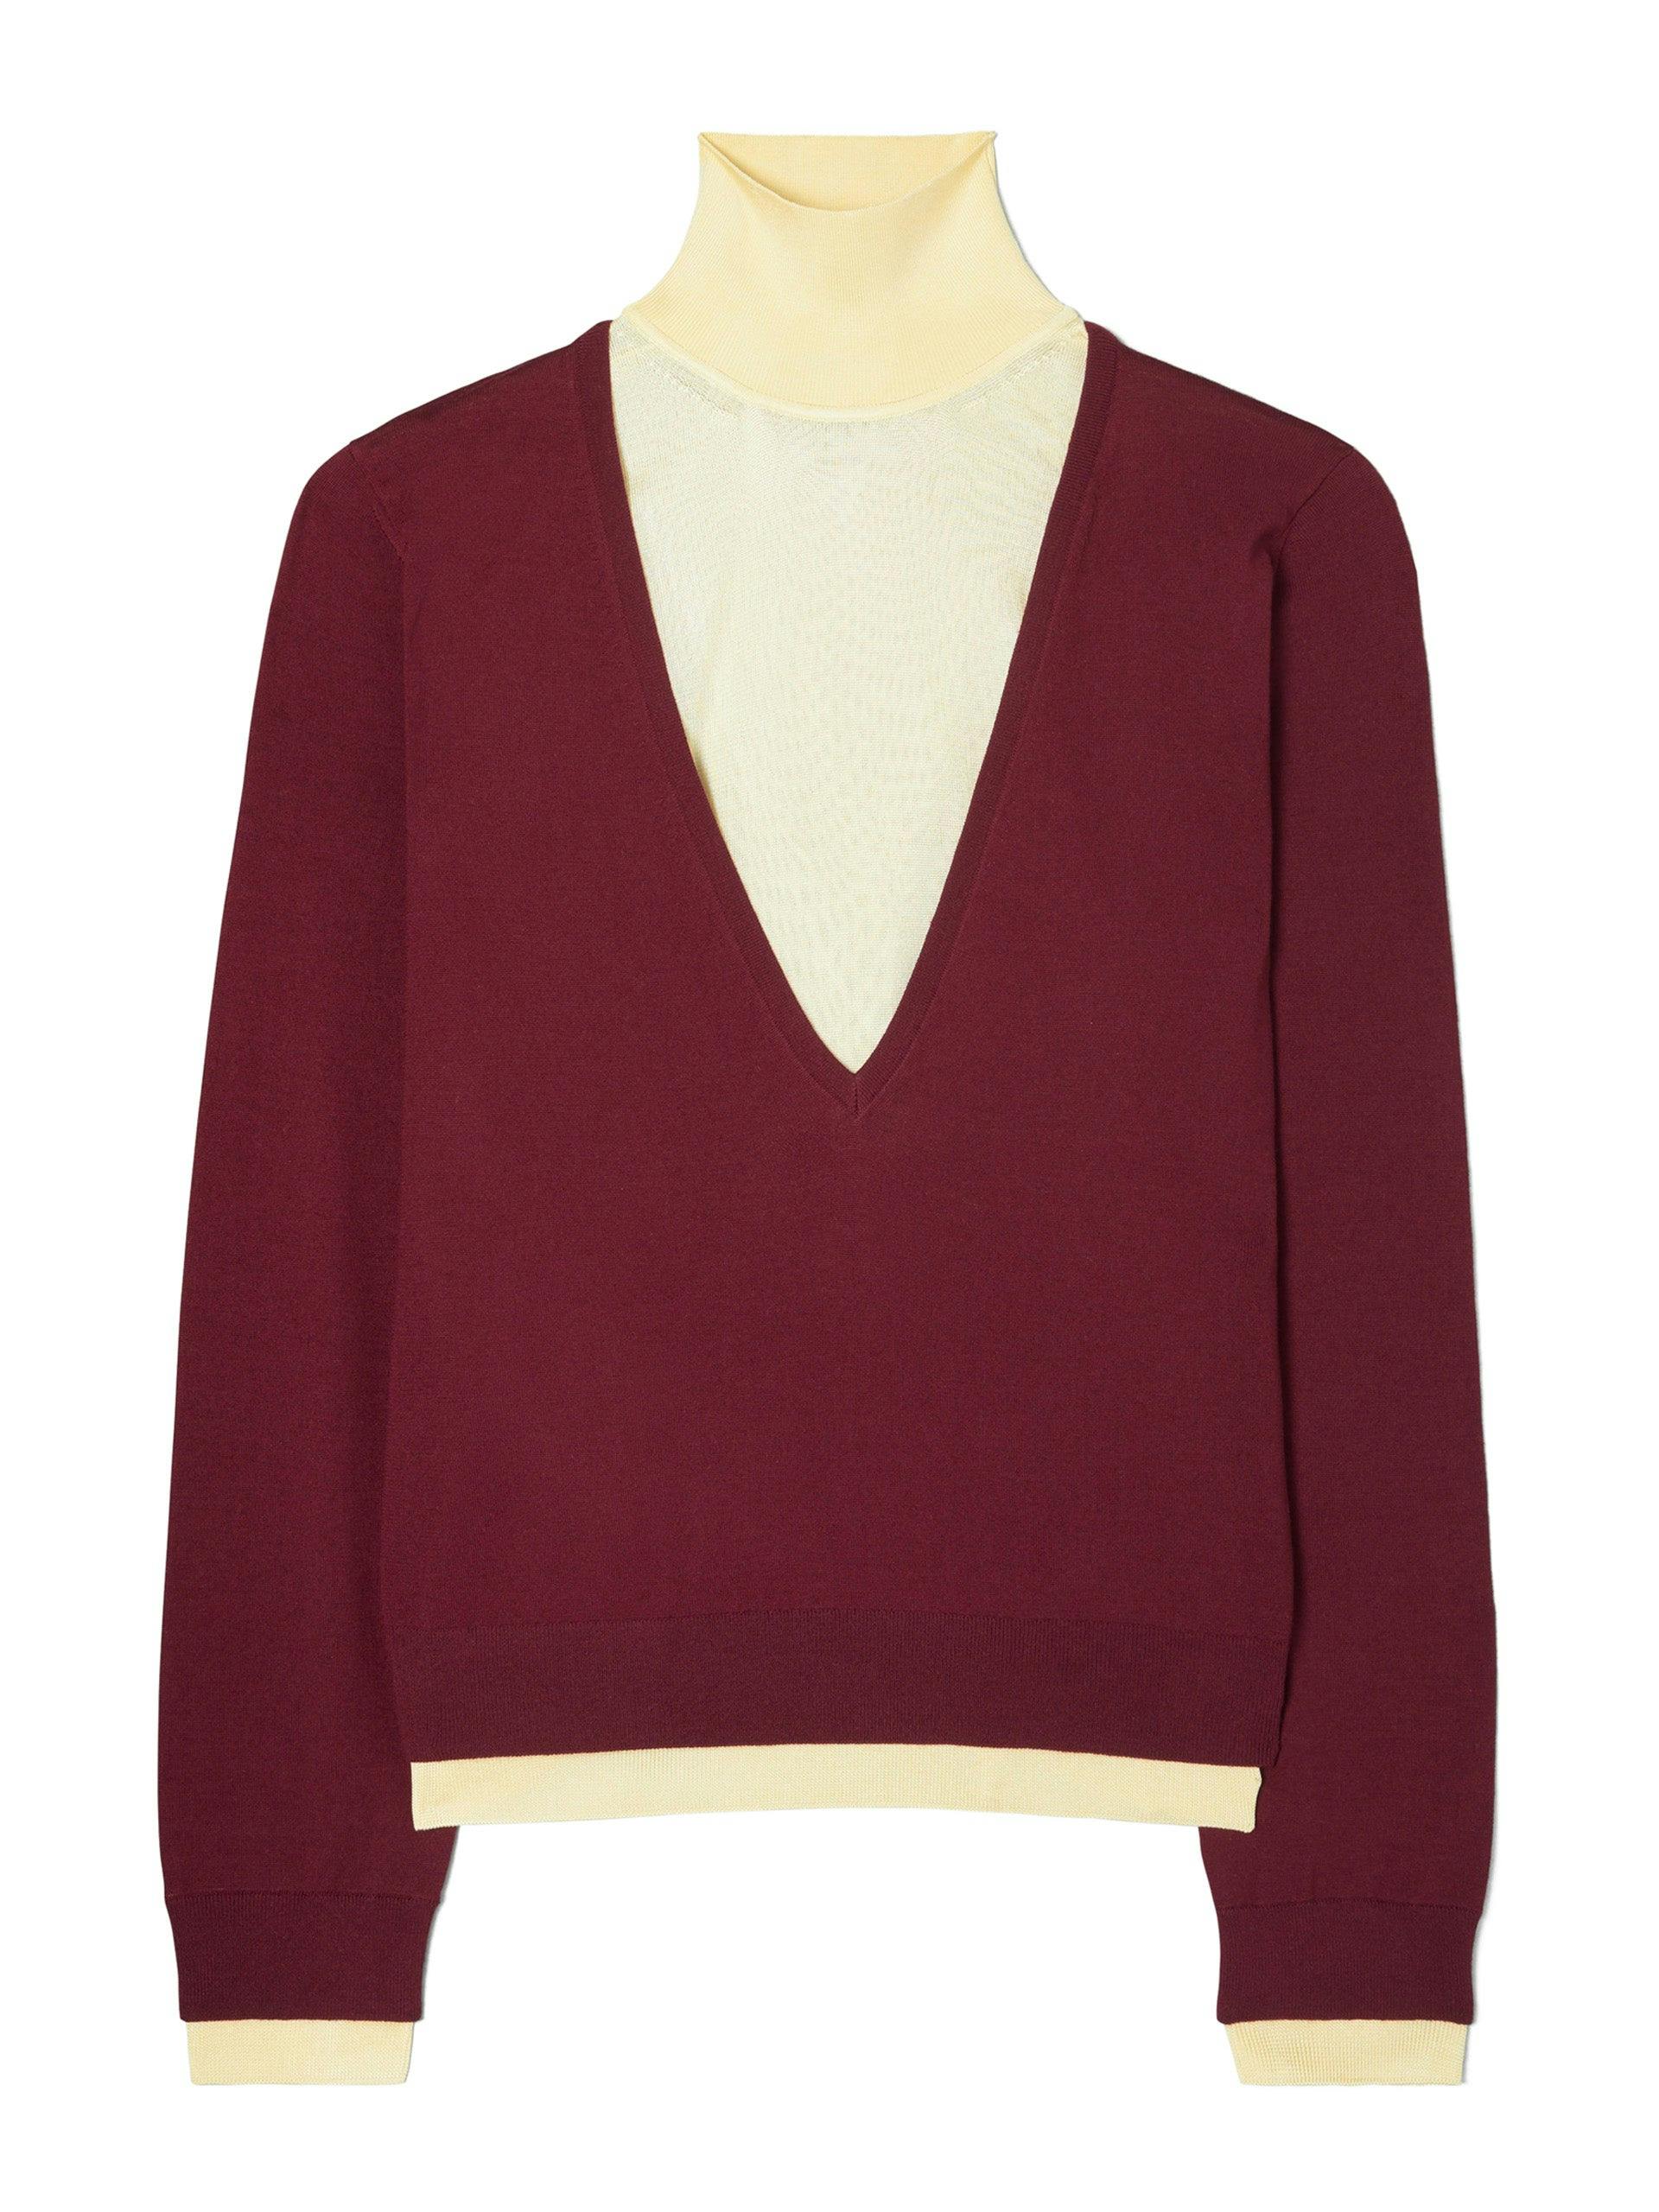 Double layer mock-neck pullover